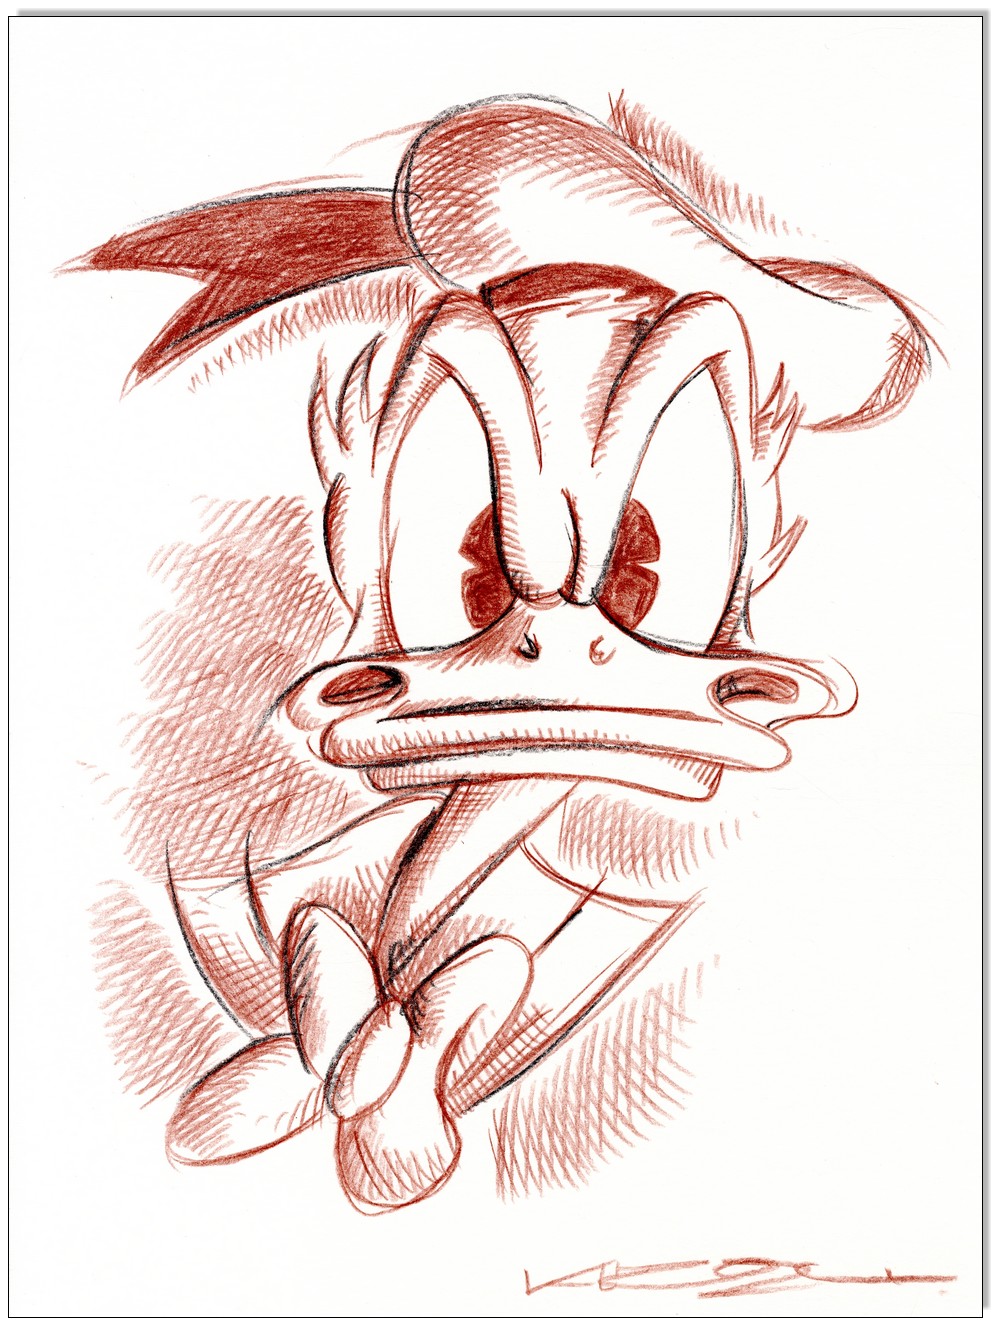 Donald Duck Angry Donald- 24 x 32 cm